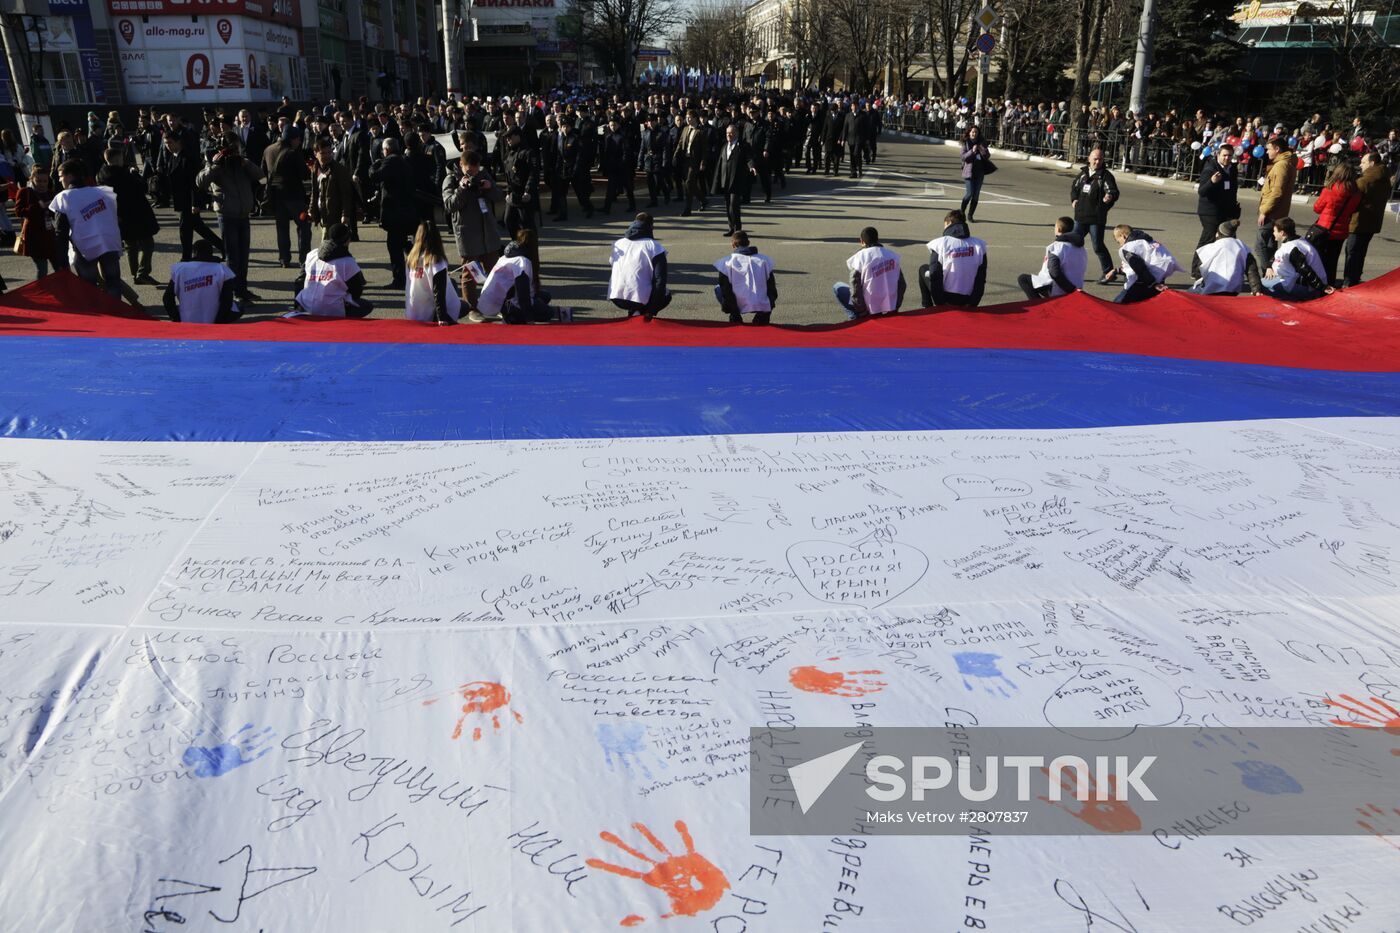 Celebration of second anniversary of Crimea's reunification with Russia